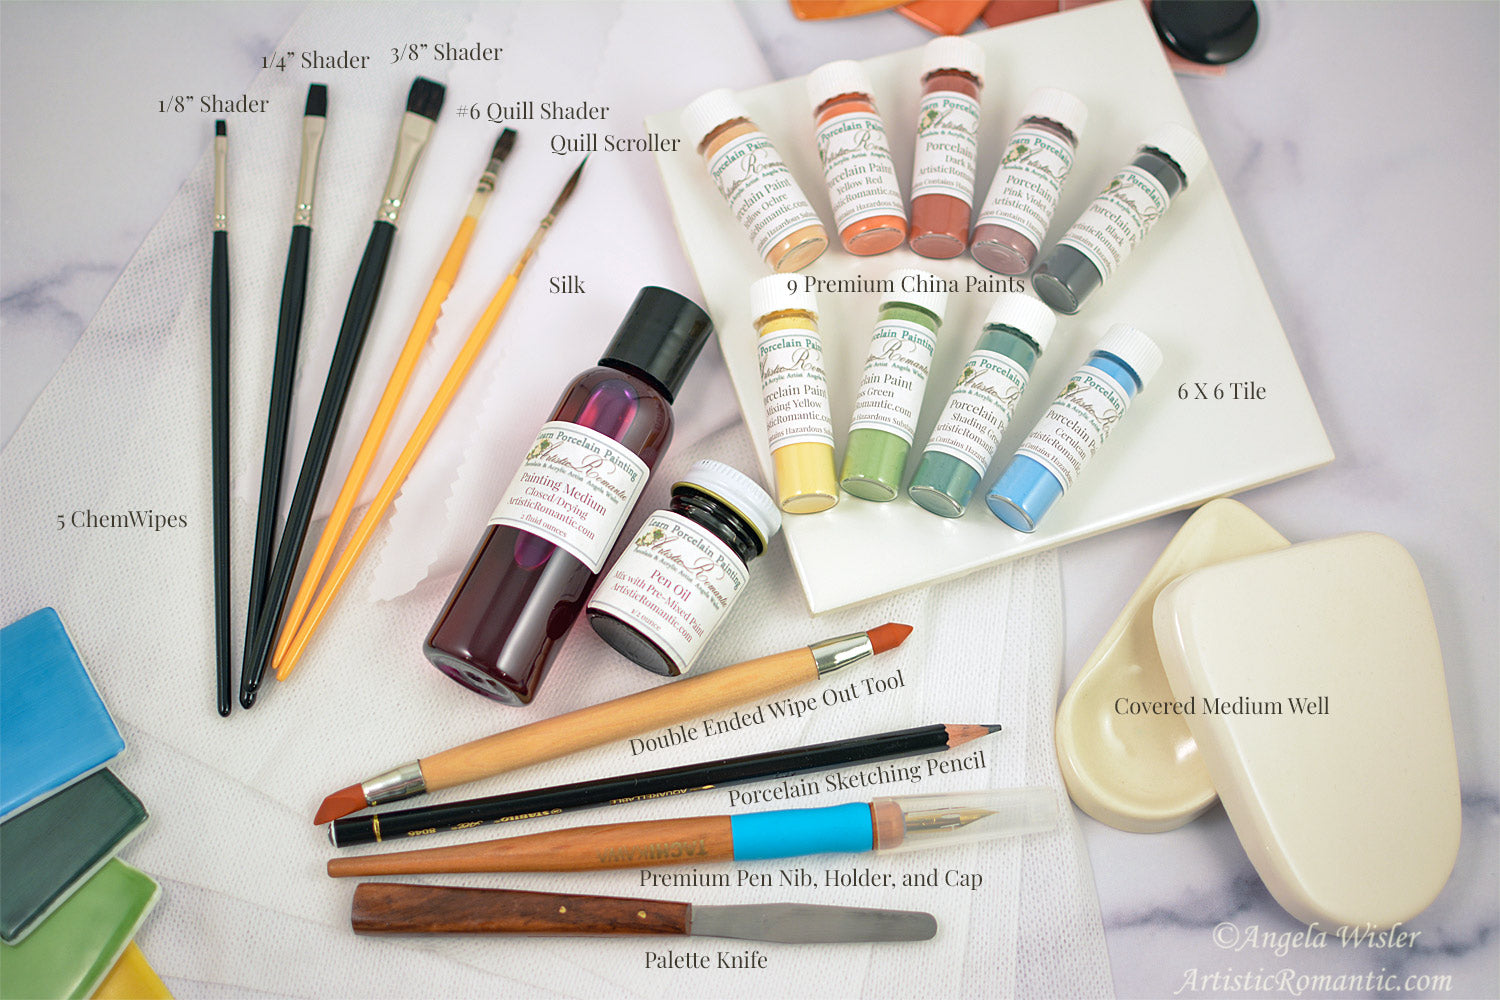 Acrylic Painting Supplies: What You Need to Get Started with